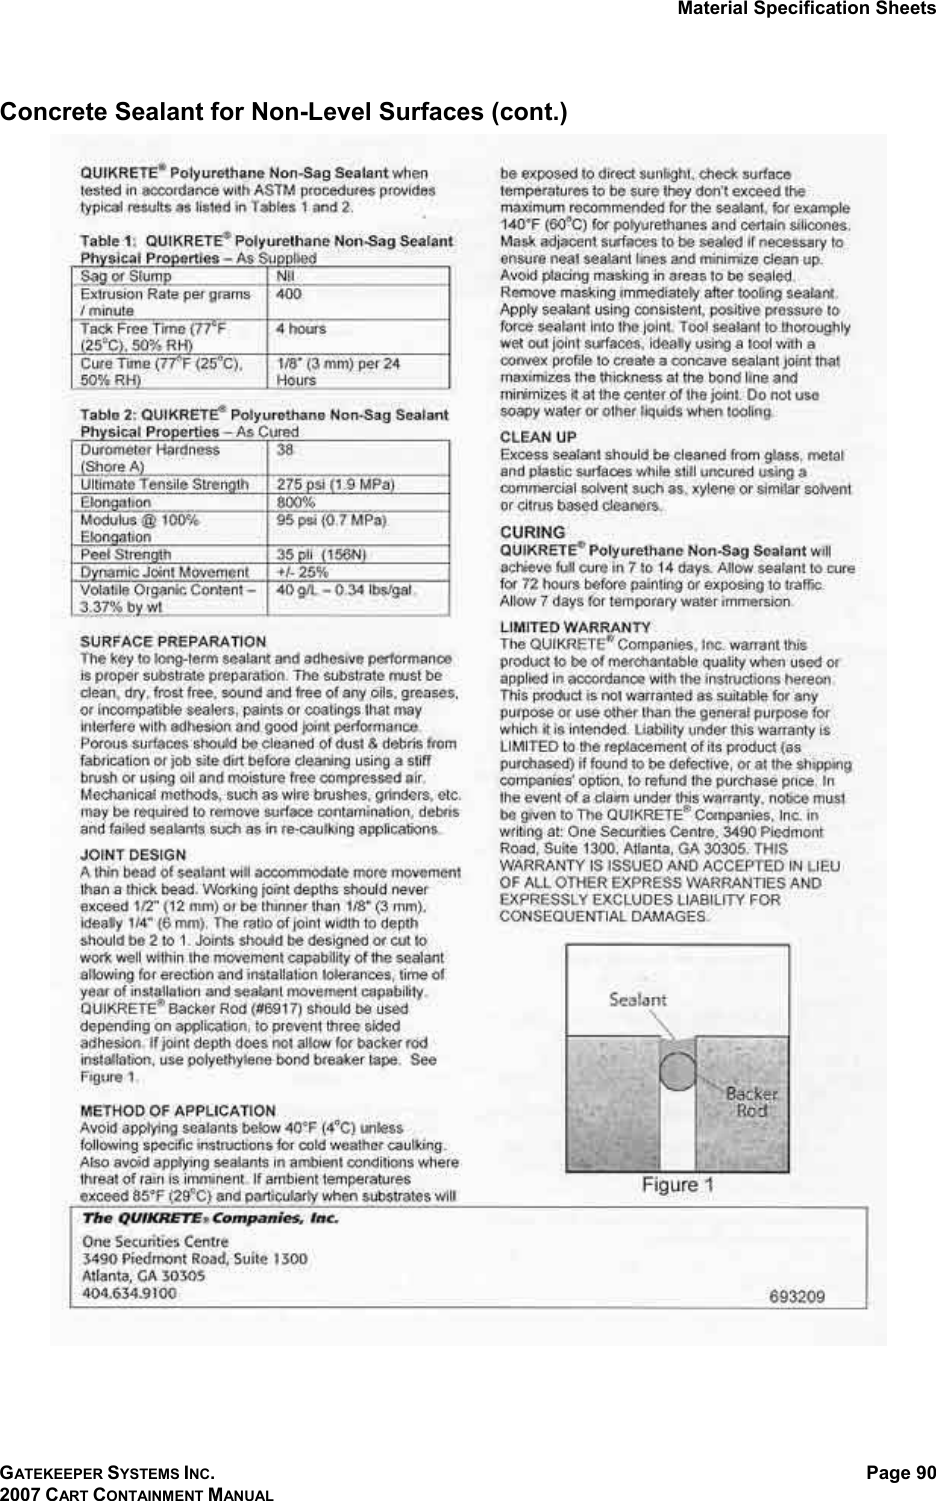 Material Specification Sheets GATEKEEPER SYSTEMS INC. 2007 CART CONTAINMENT MANUAL Page 90  Concrete Sealant for Non-Level Surfaces (cont.)   